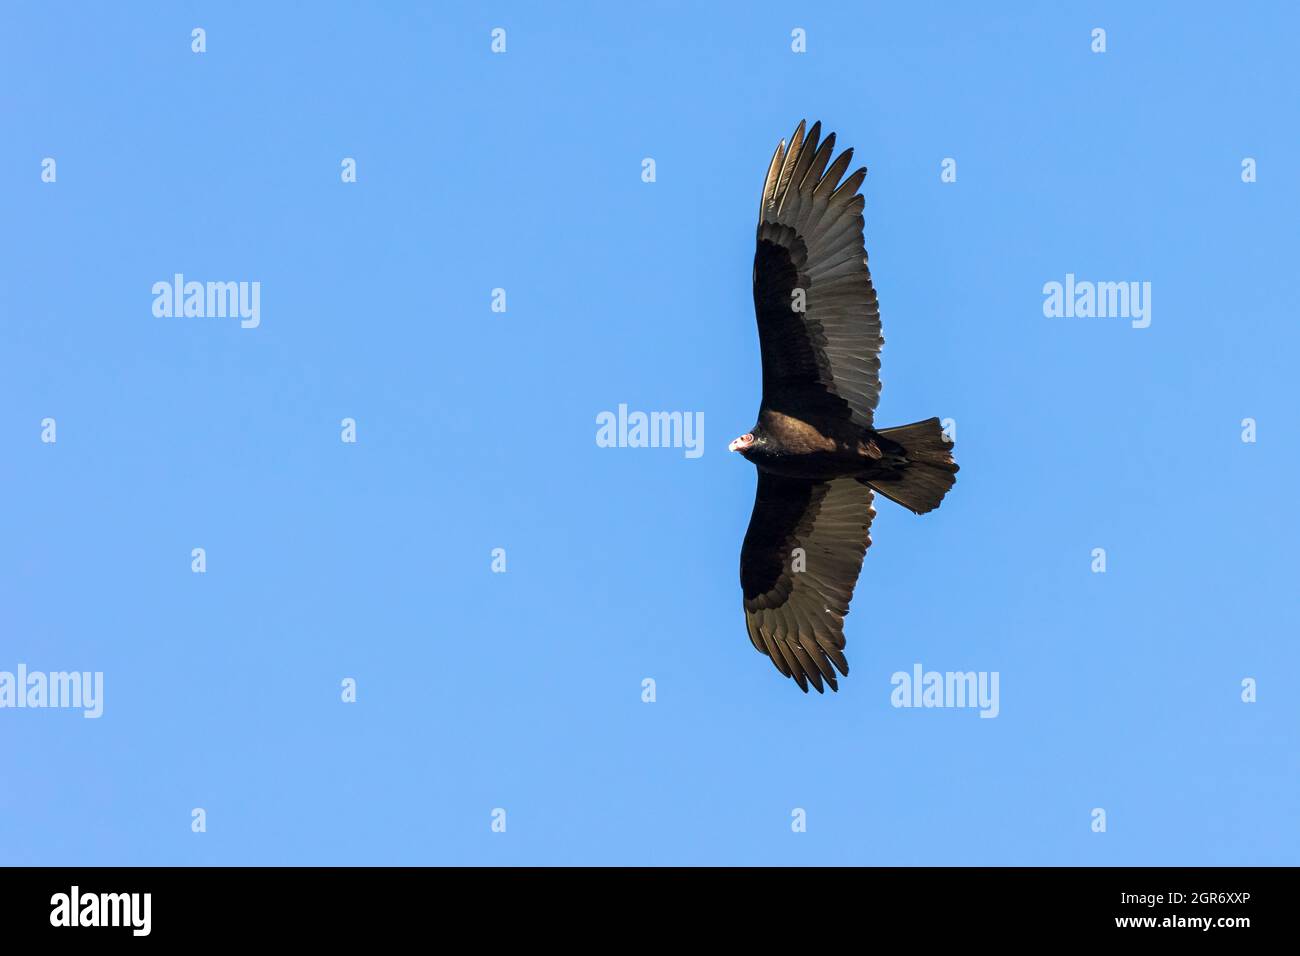 Low Angle View Of Turkey Vulture Flying Against Clear Blue Sky Stock Photo